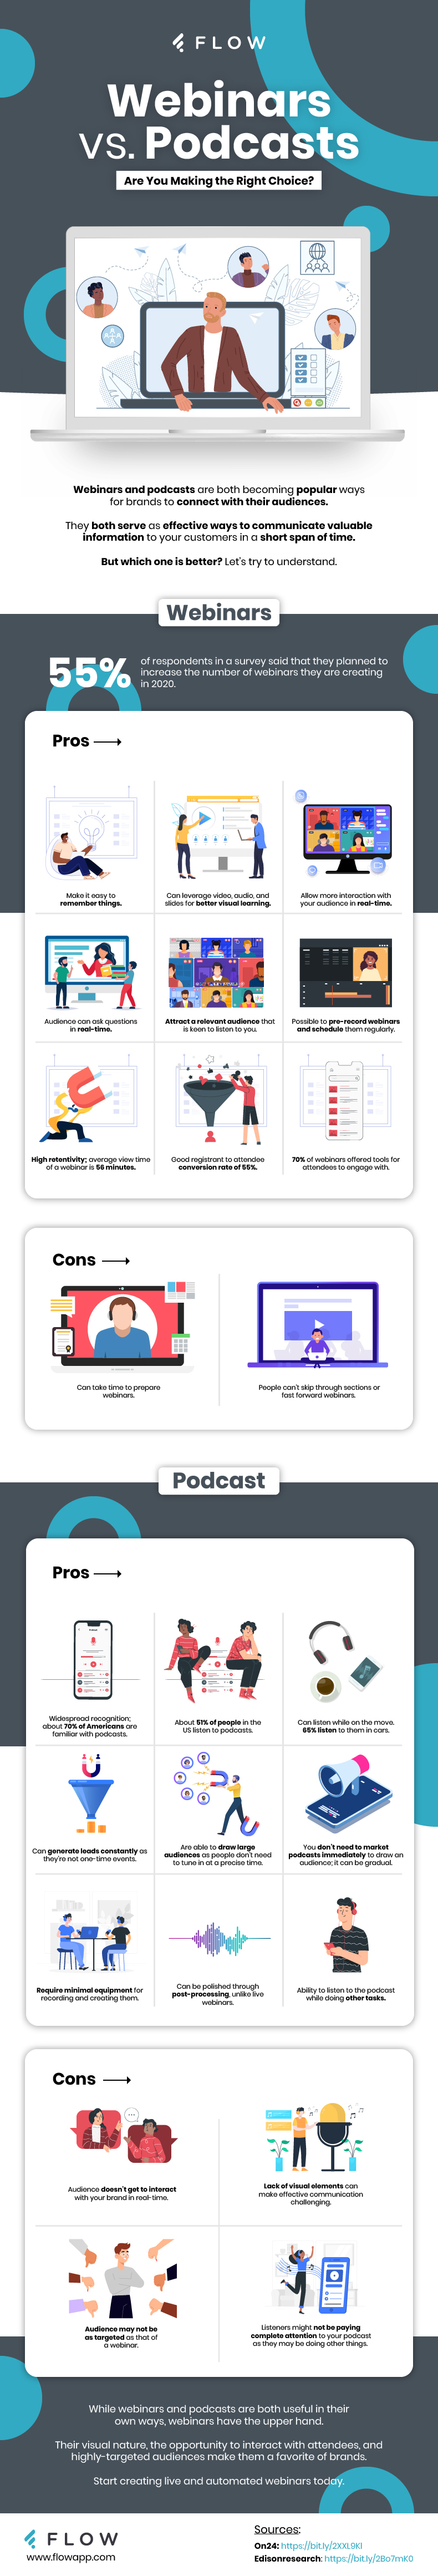 Webinars Vs. Podcasts: Which is the Best Broadcasting Channel for Brands? 1